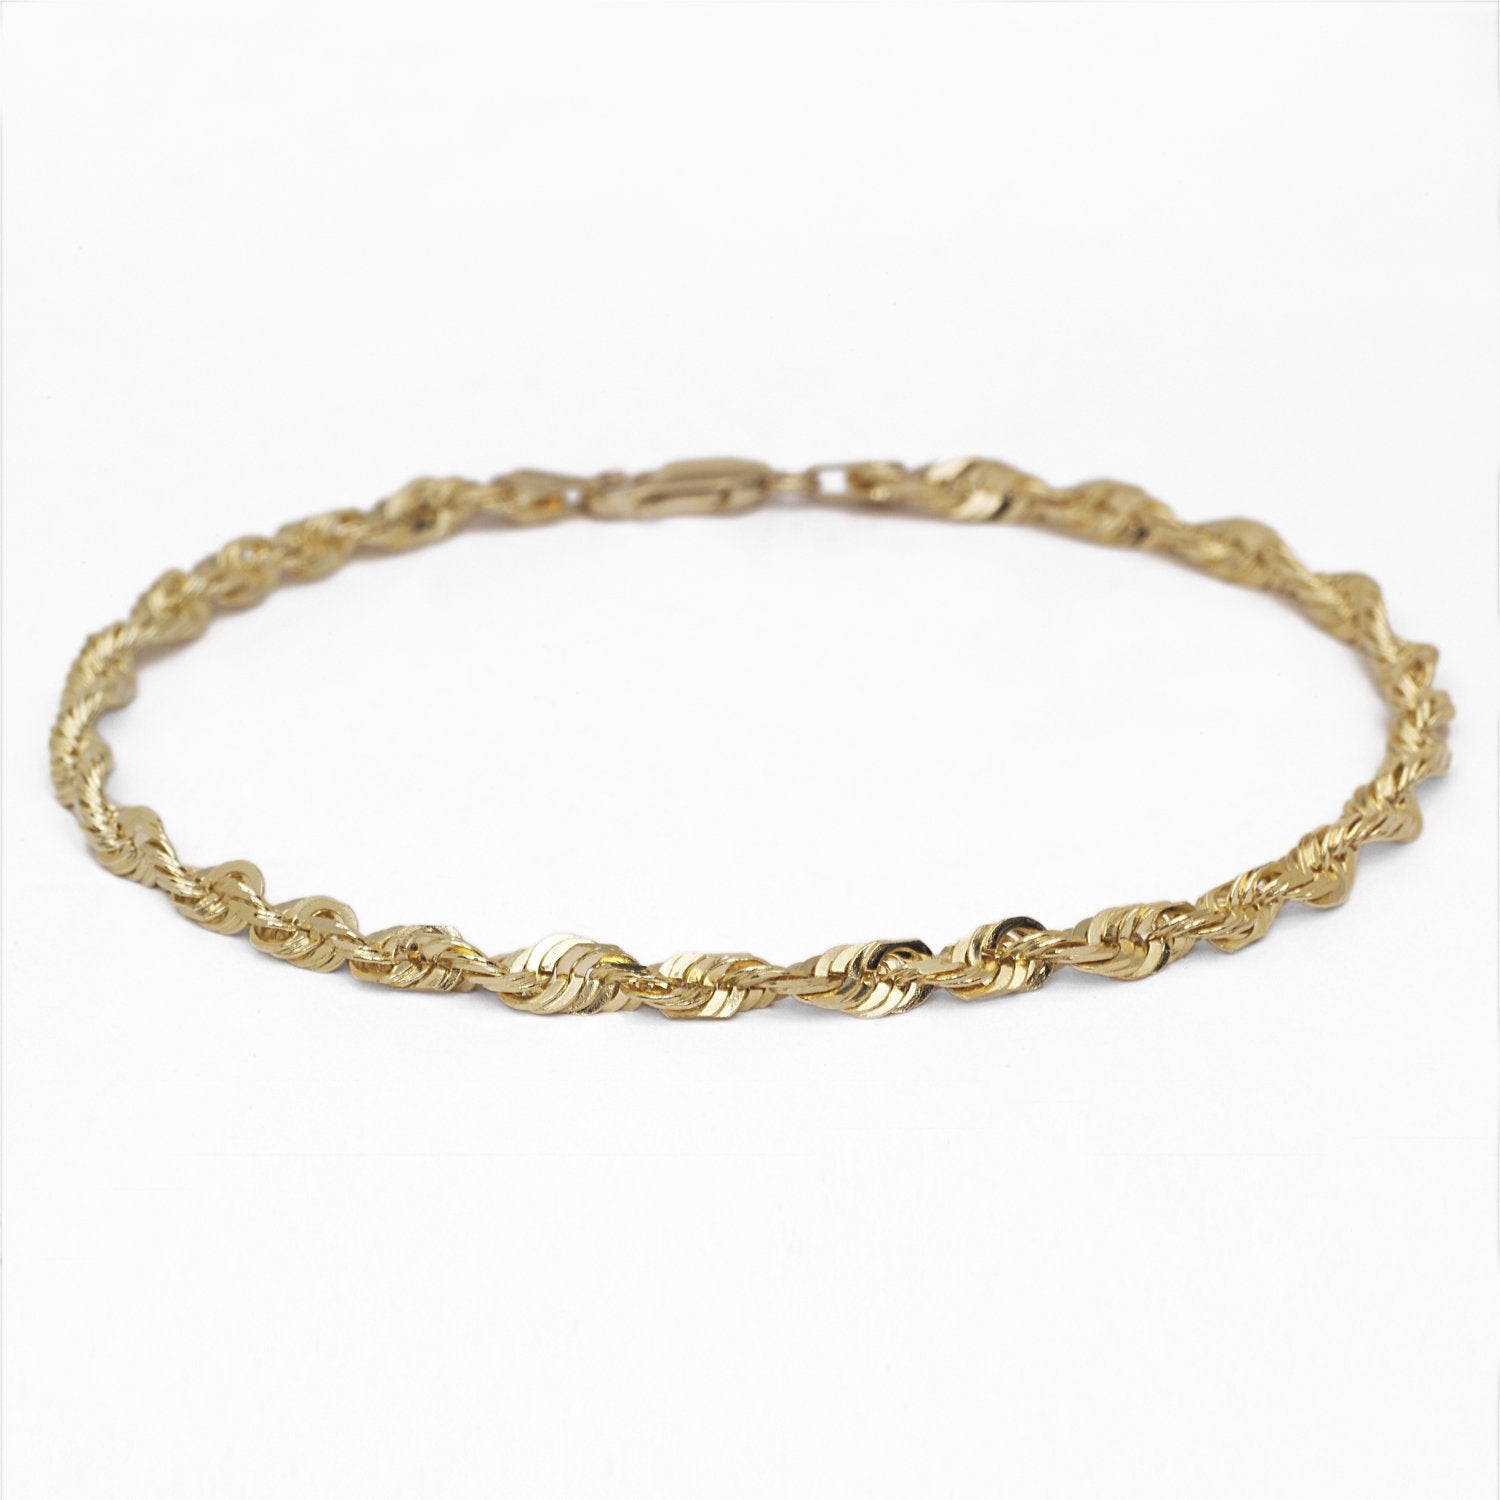 10k Yellow Gold Solid Diamond Cut Rope Chain Bracelet and Anklet, 4mm